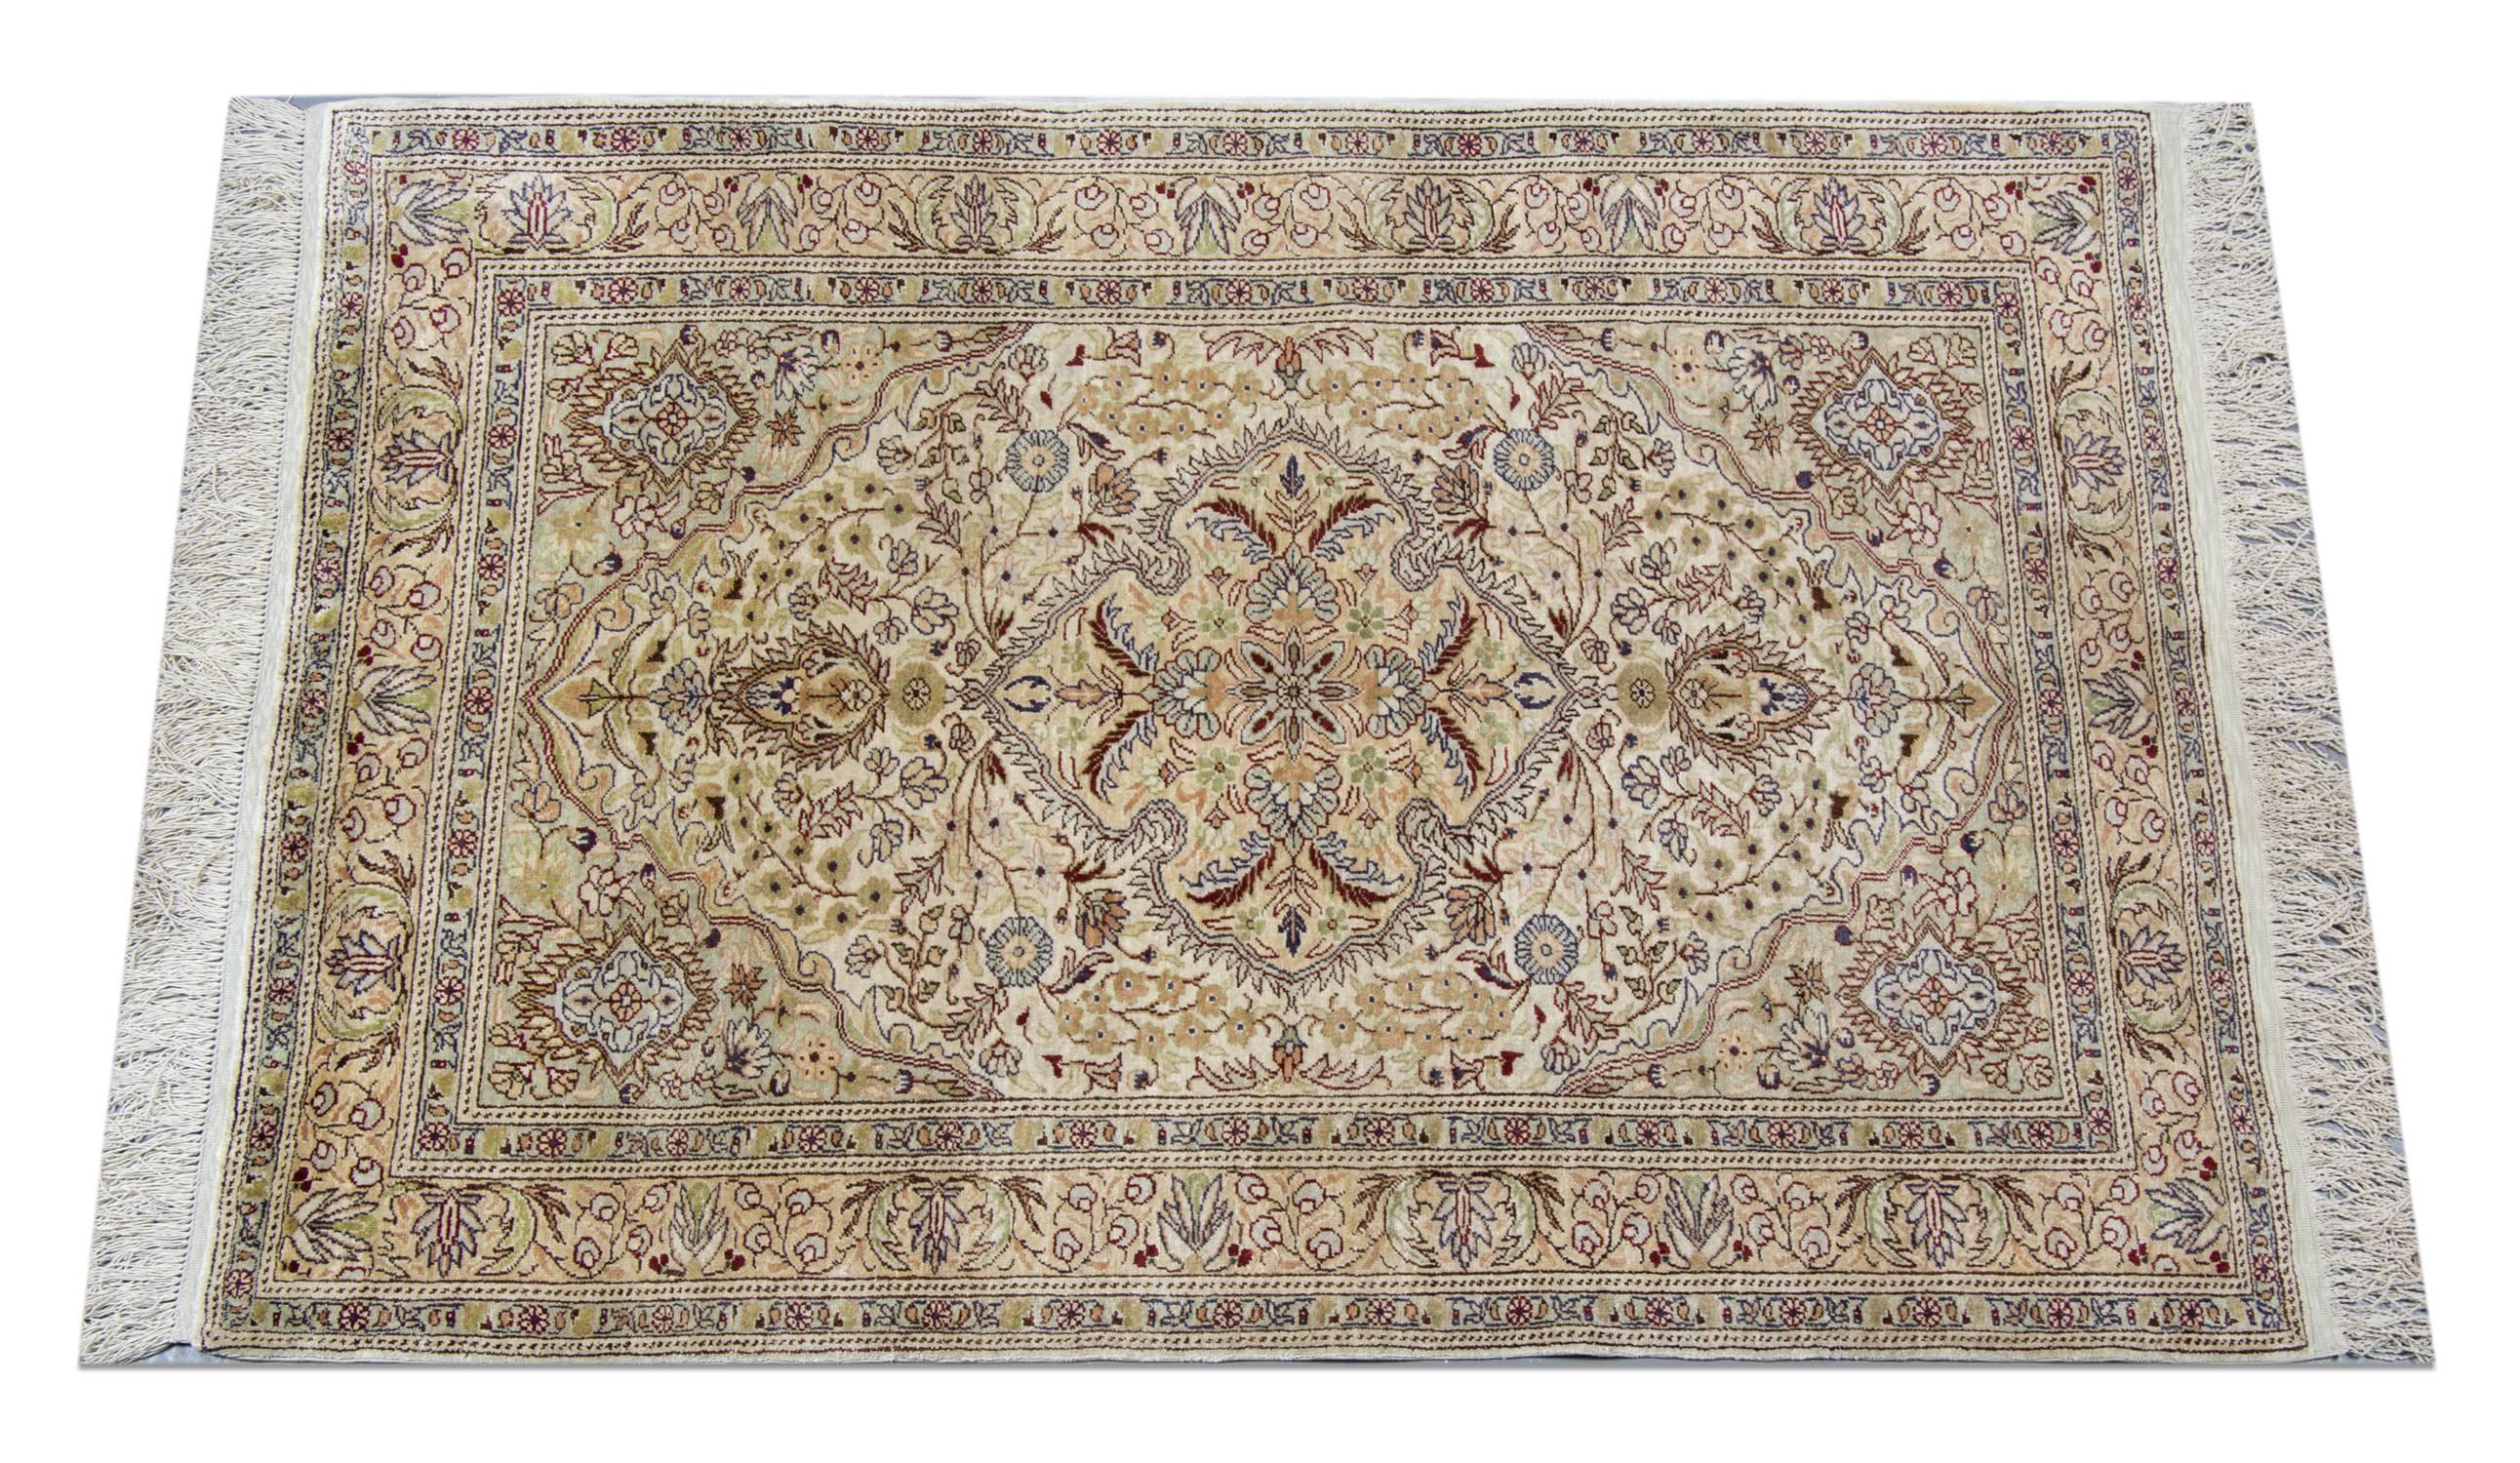 The handmade carpet manufacturing of these masterpieces Turkish rugs began early the 20th century. The luxury rugs from Kayseri are known for their artistry with the pile of wool or silk. Those carpets and rugs are also often manufactured with high